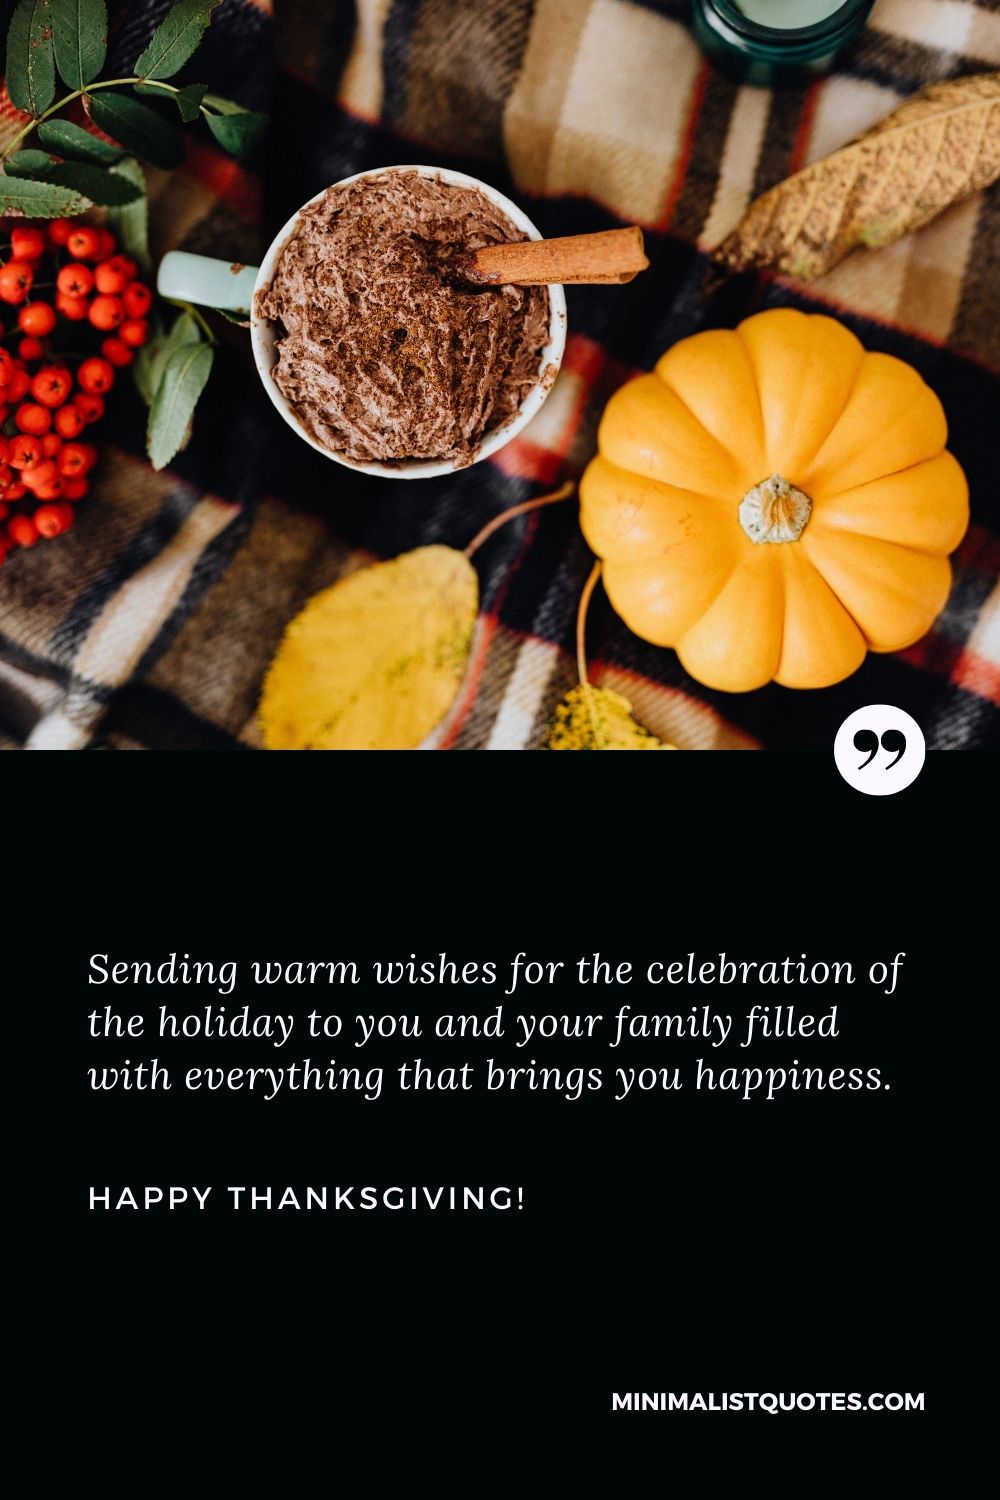 Happy Thanksgiving from my family to yours: Sending warm wishes for the celebration of the holiday to you and your family filled with everything that brings you happiness. Happy Thanksgiving!